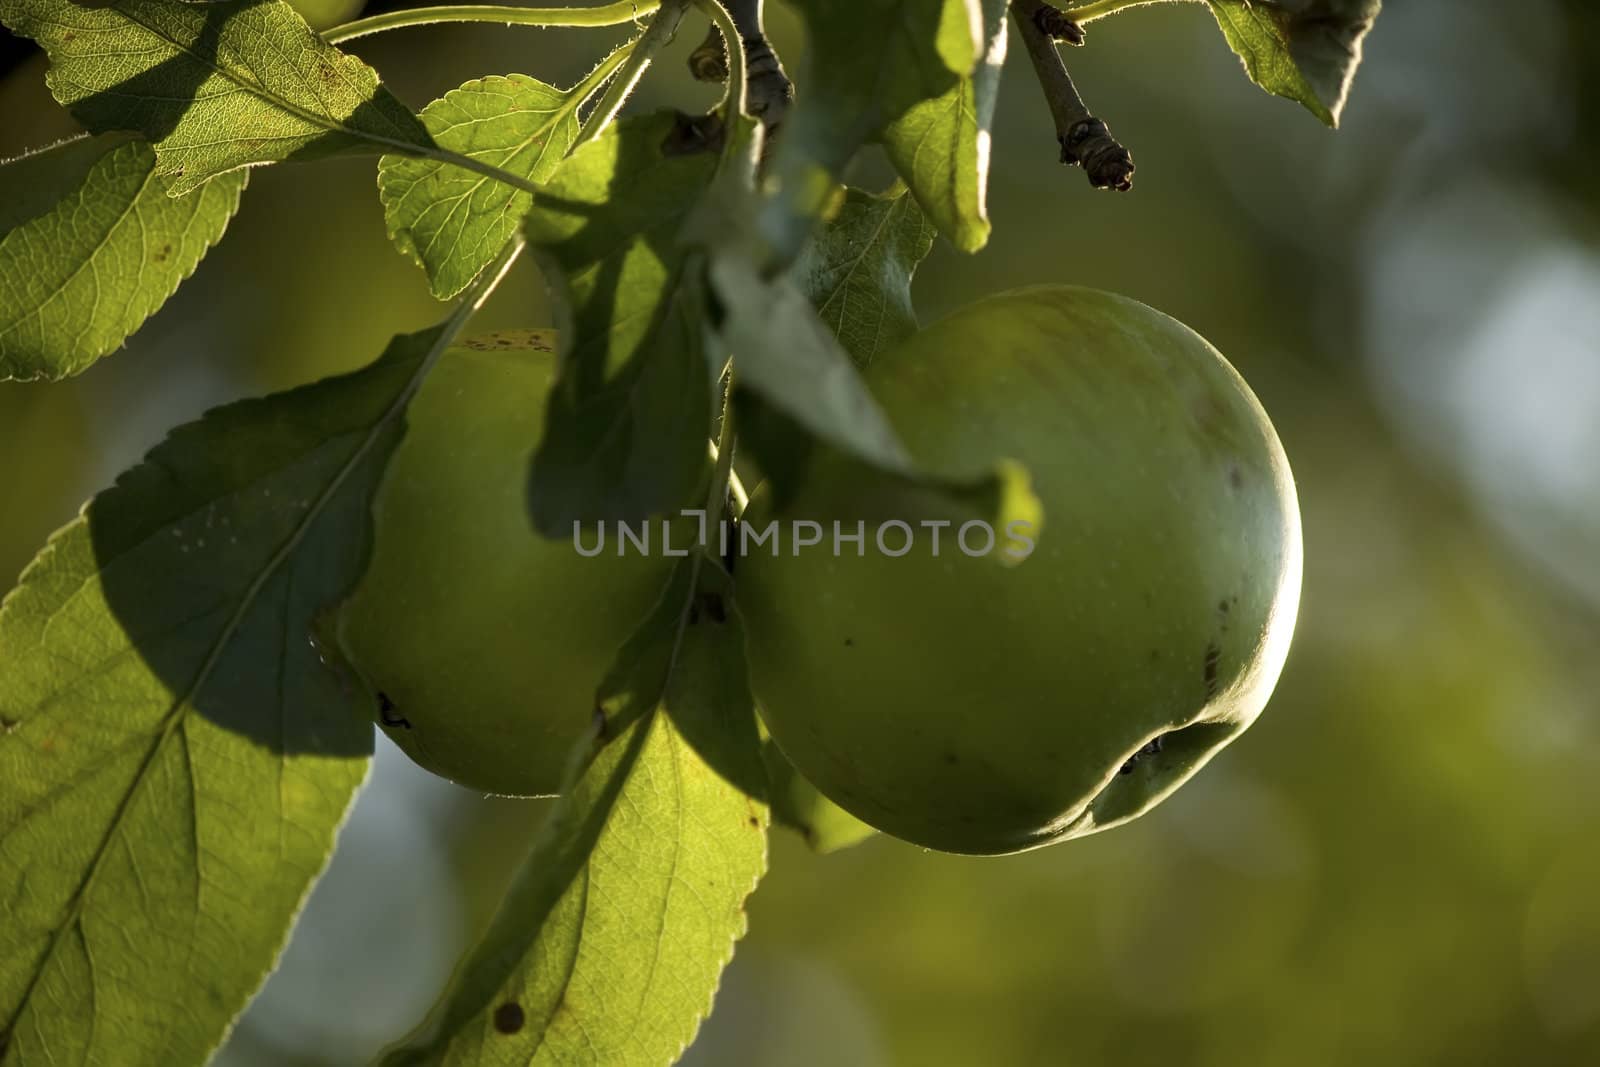 green apples on a branch